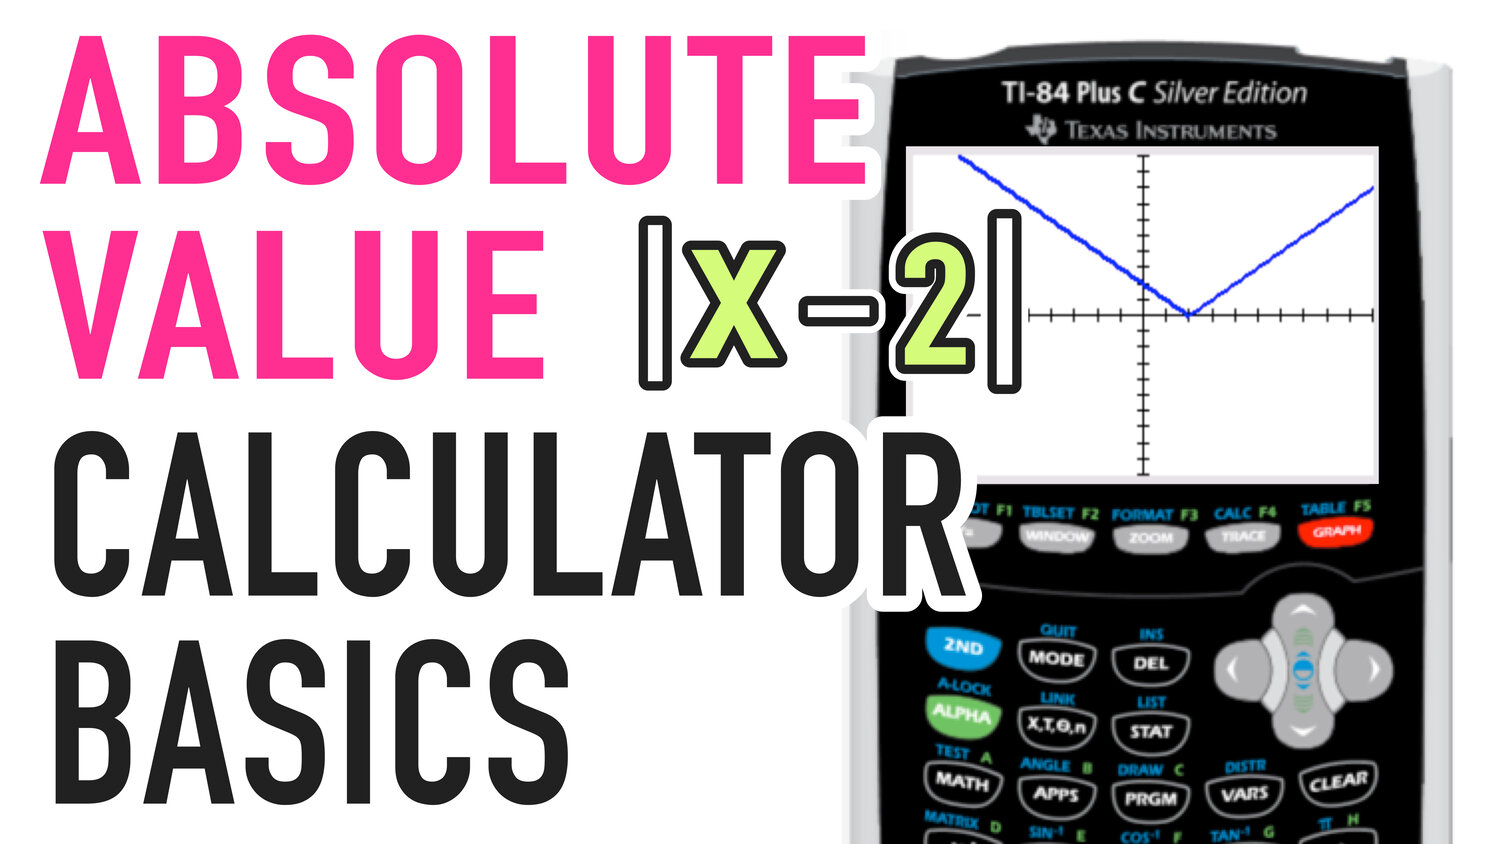 Absolute Value Calculator Basics: Everything You Need to Know